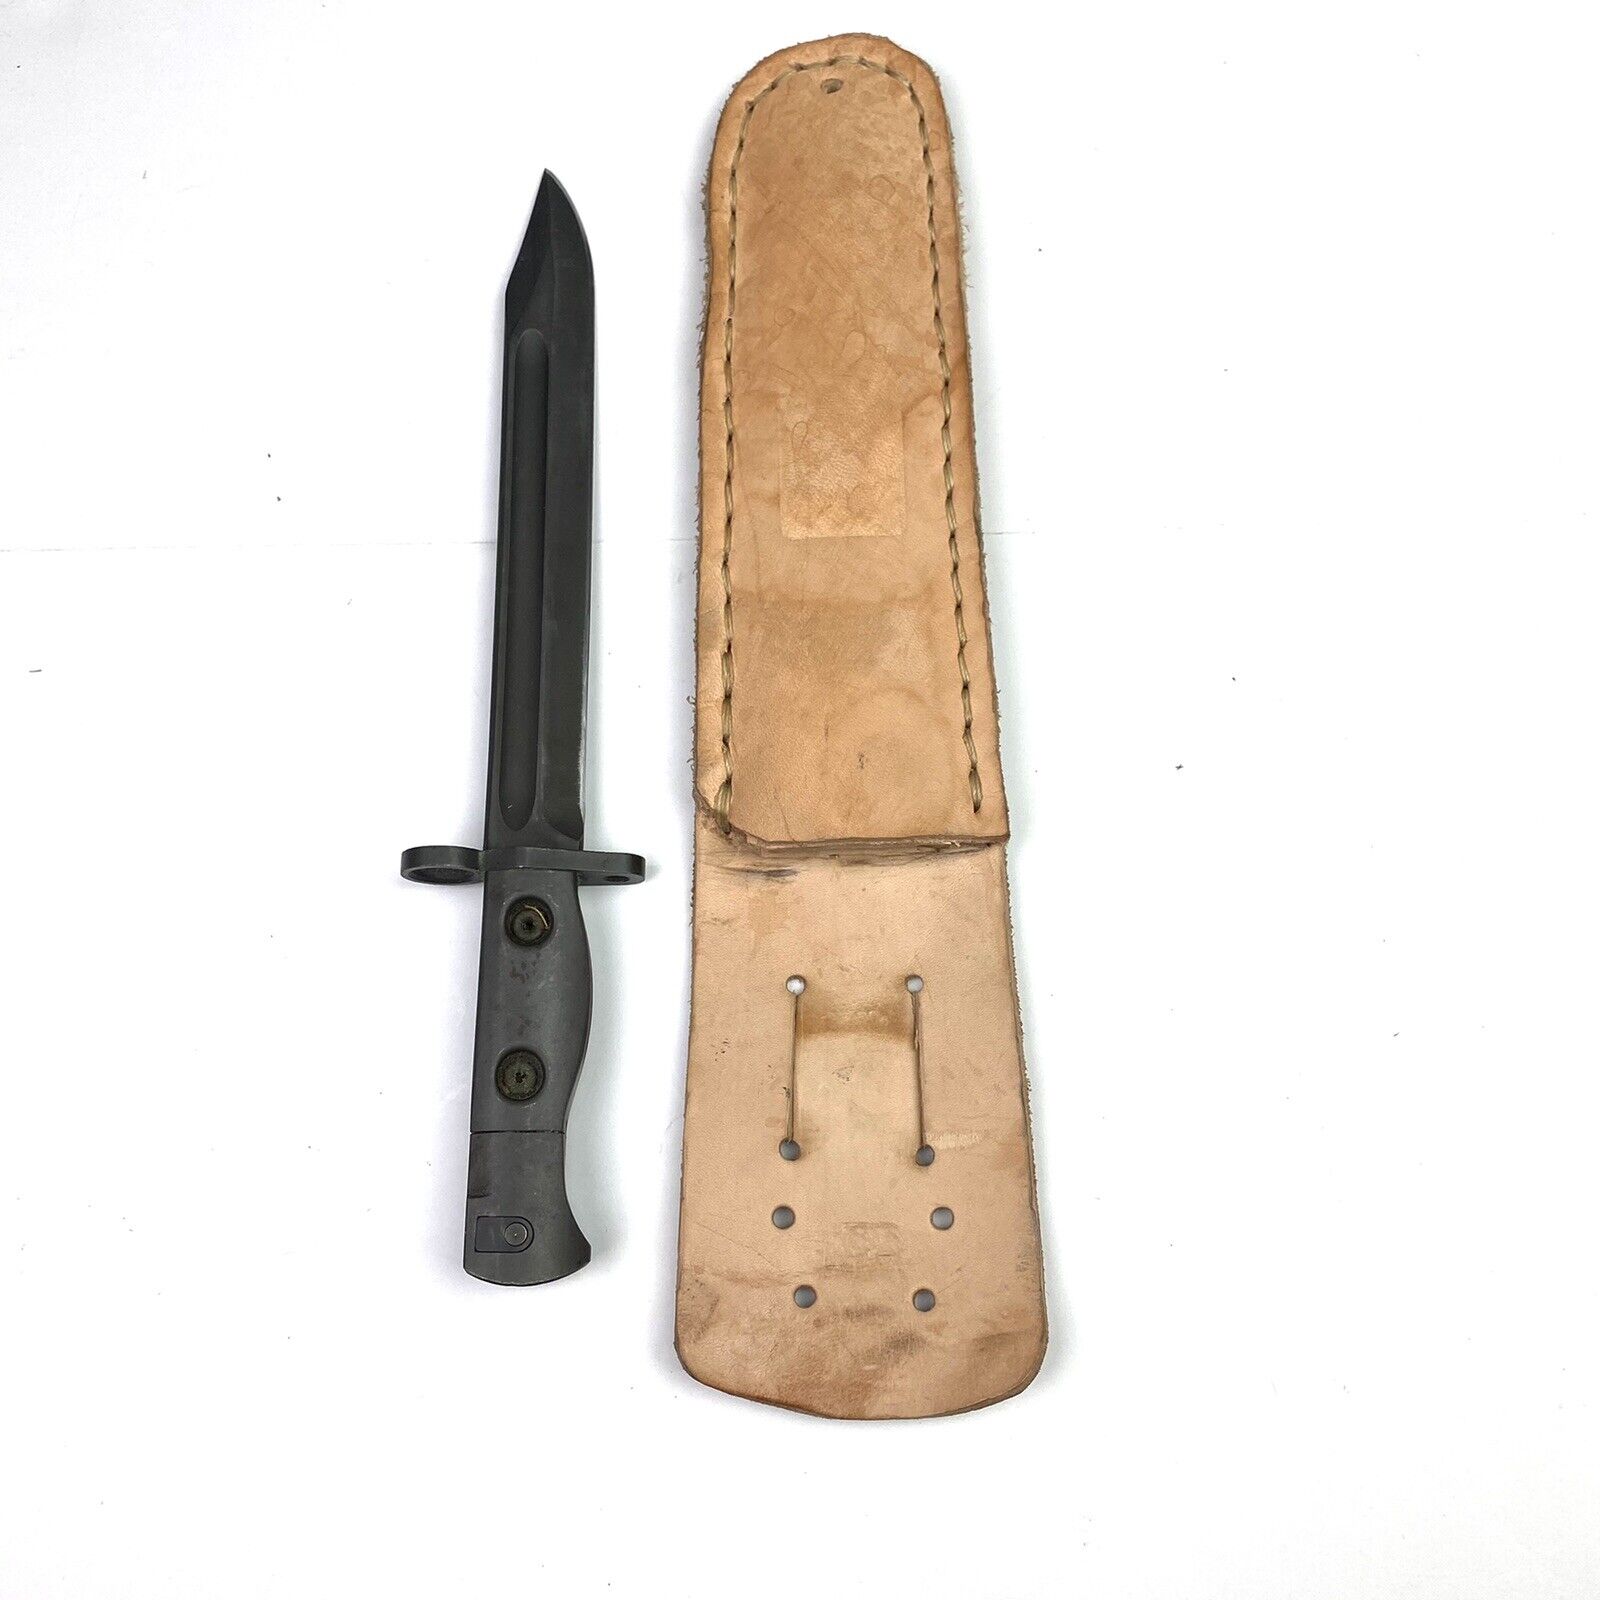 Australian Bayonet L1A2 Knife Collectible with Leather Sheath Collectible Blade